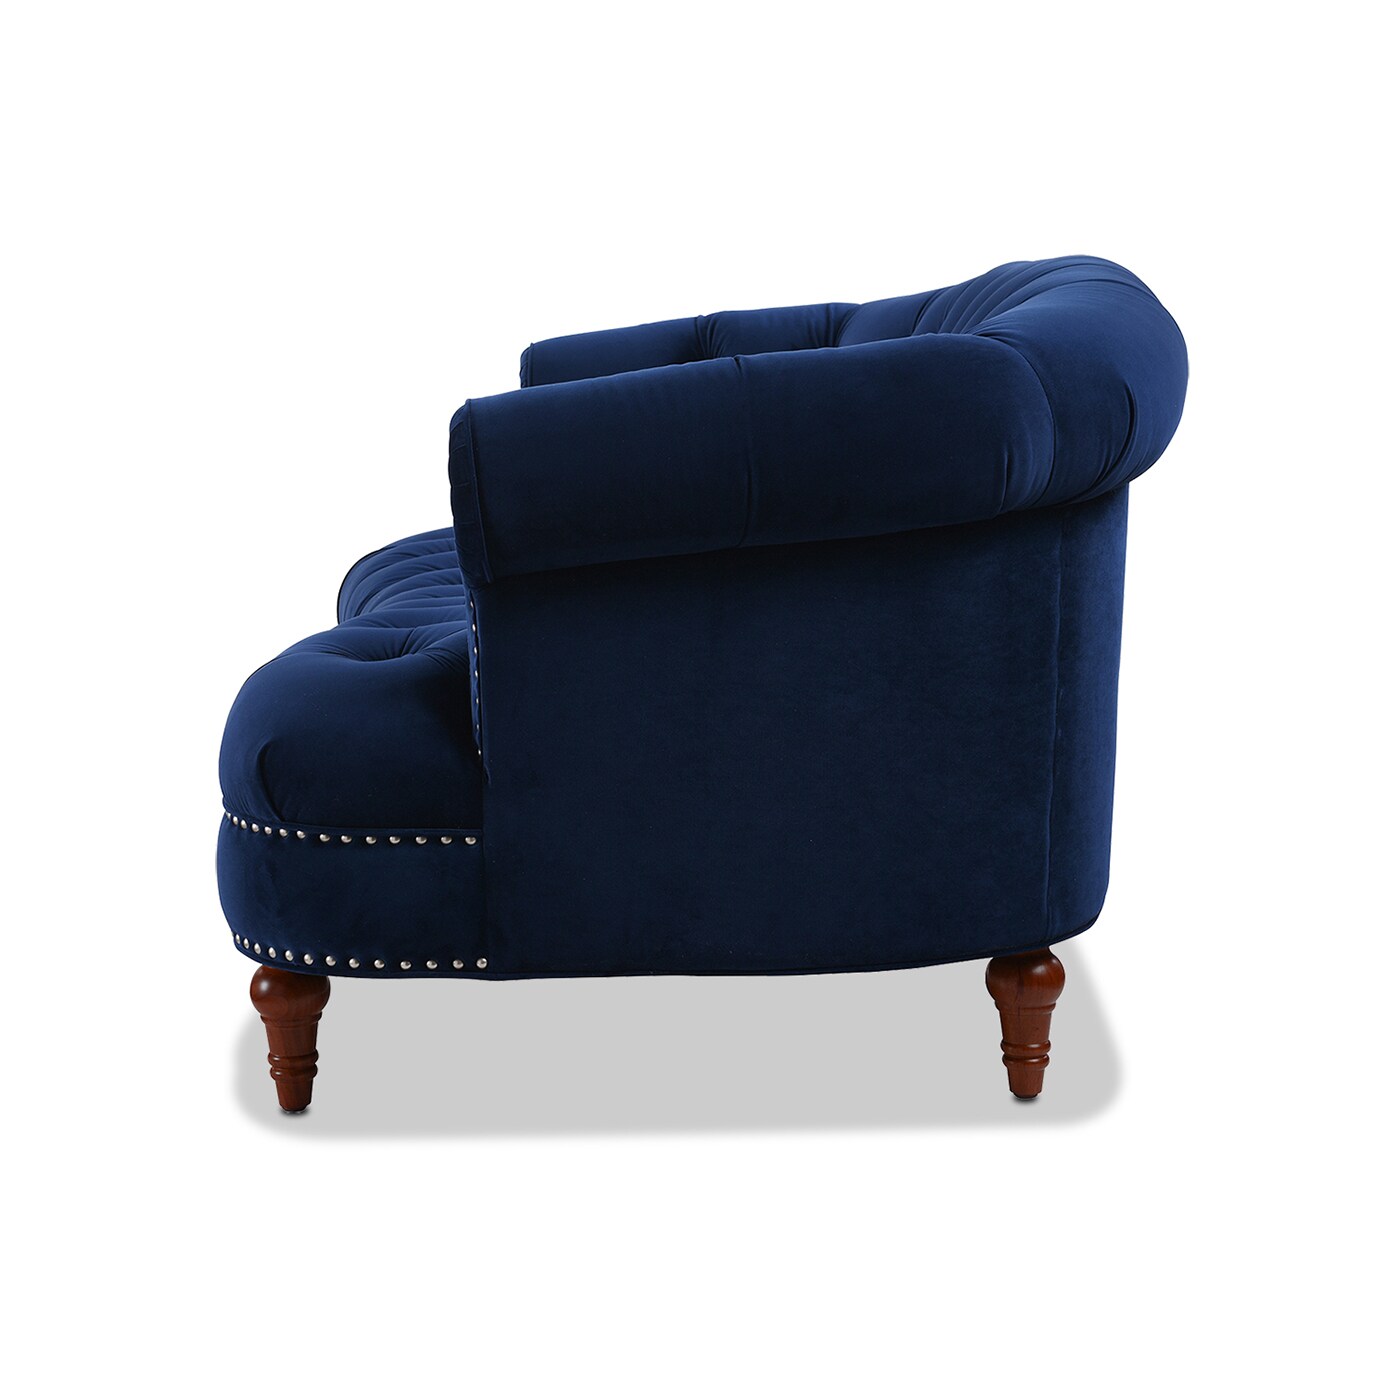 Jennifer Taylor Home department in La Navy Midcentury Couches, the & 2-seater Loveseat Blue Rosa Loveseats Sofas at 68.5-in Velvet